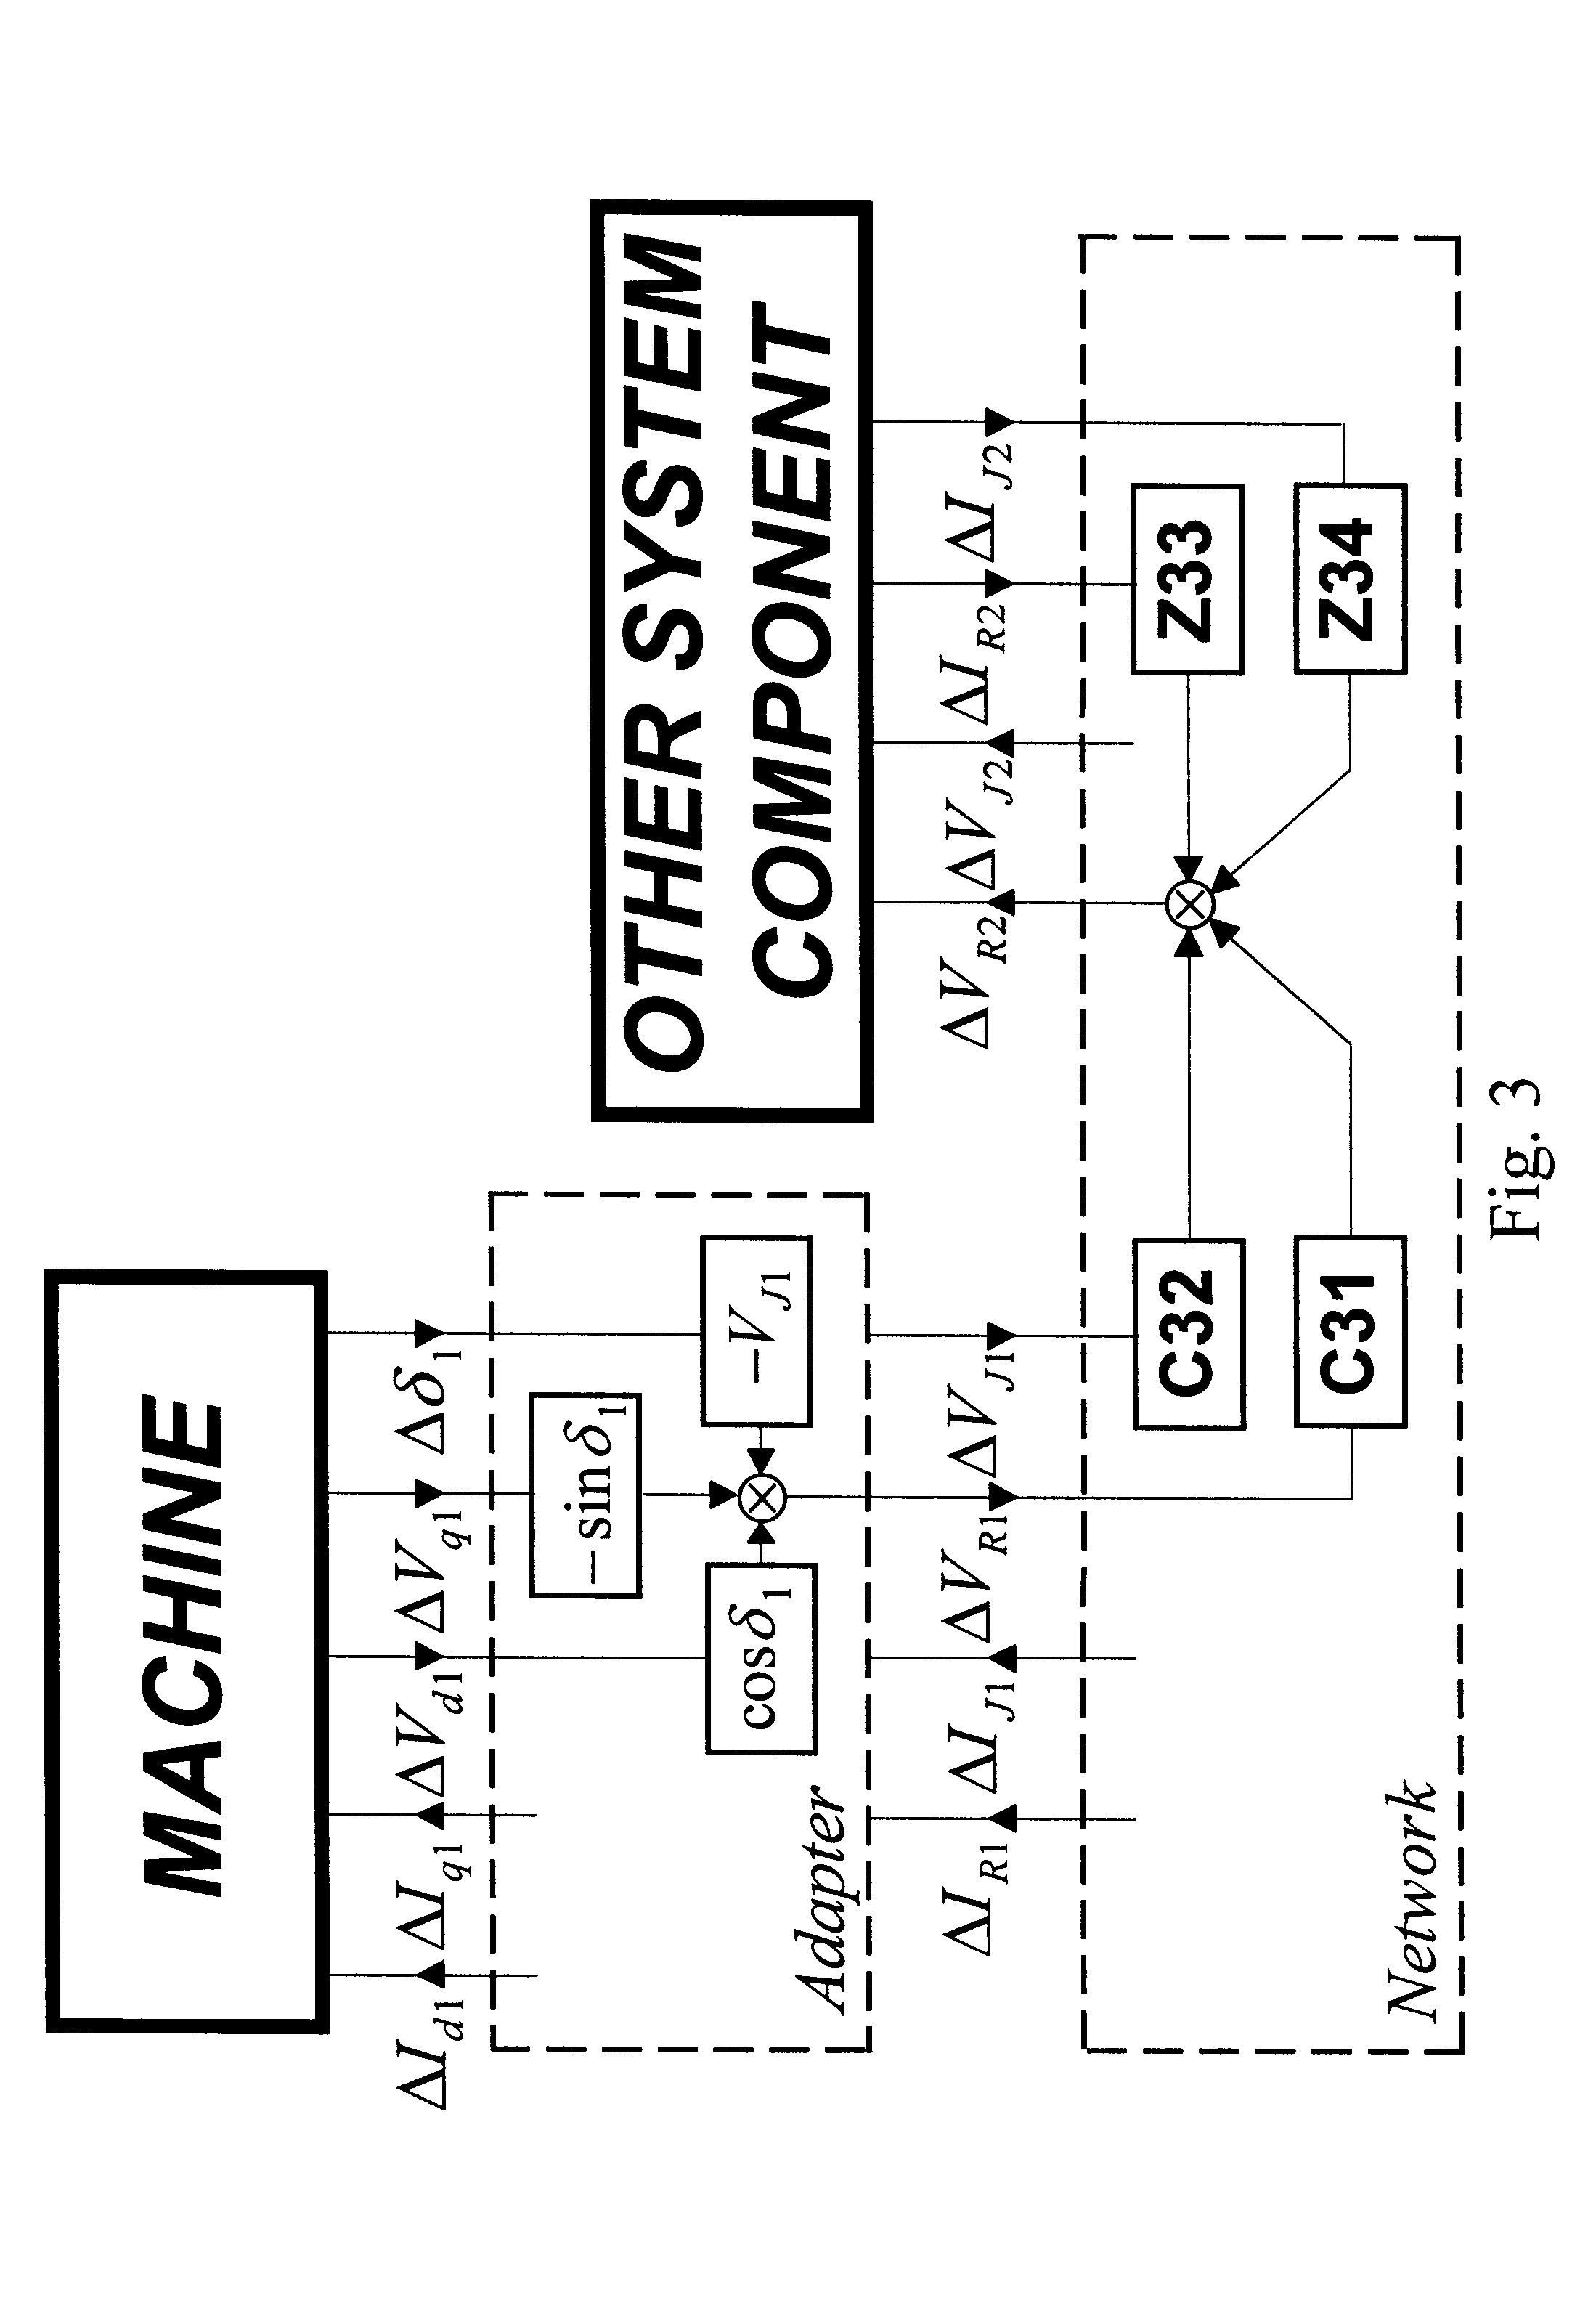 Electrical power network modelling method